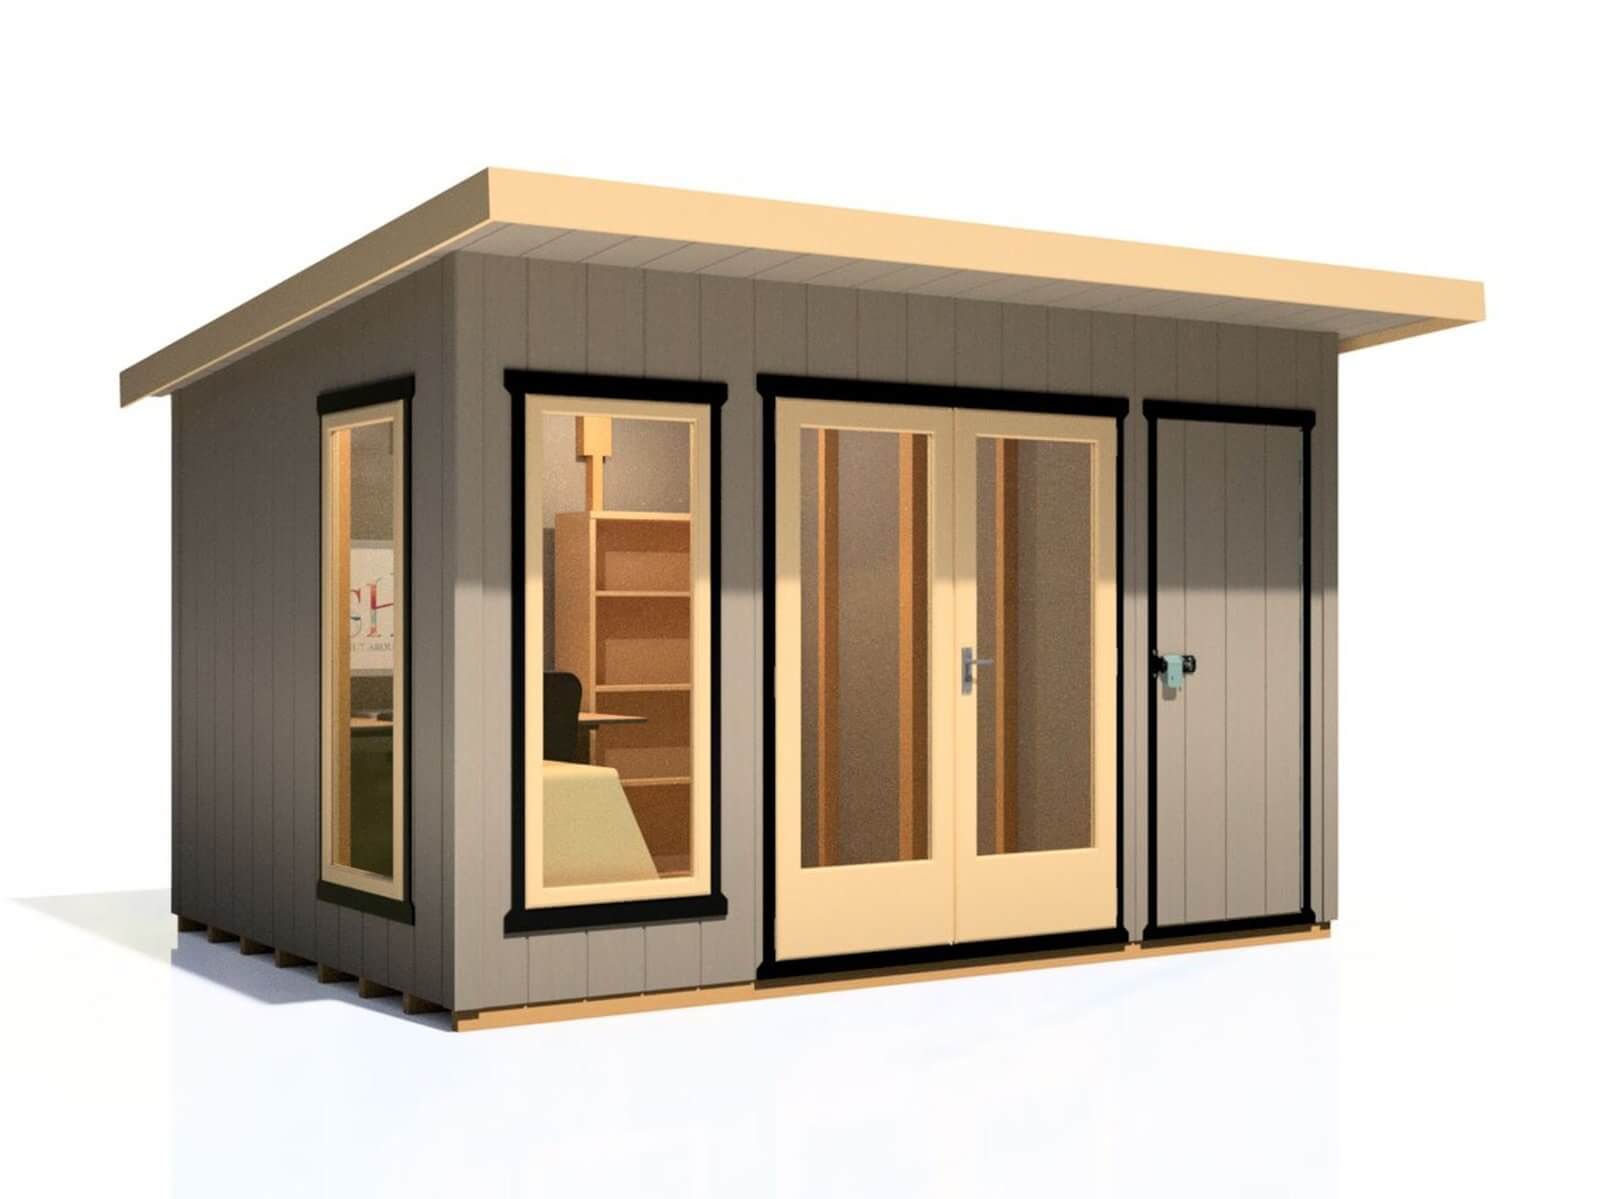 Shire Cali Garden Office 12 x 8 Pent and Storage